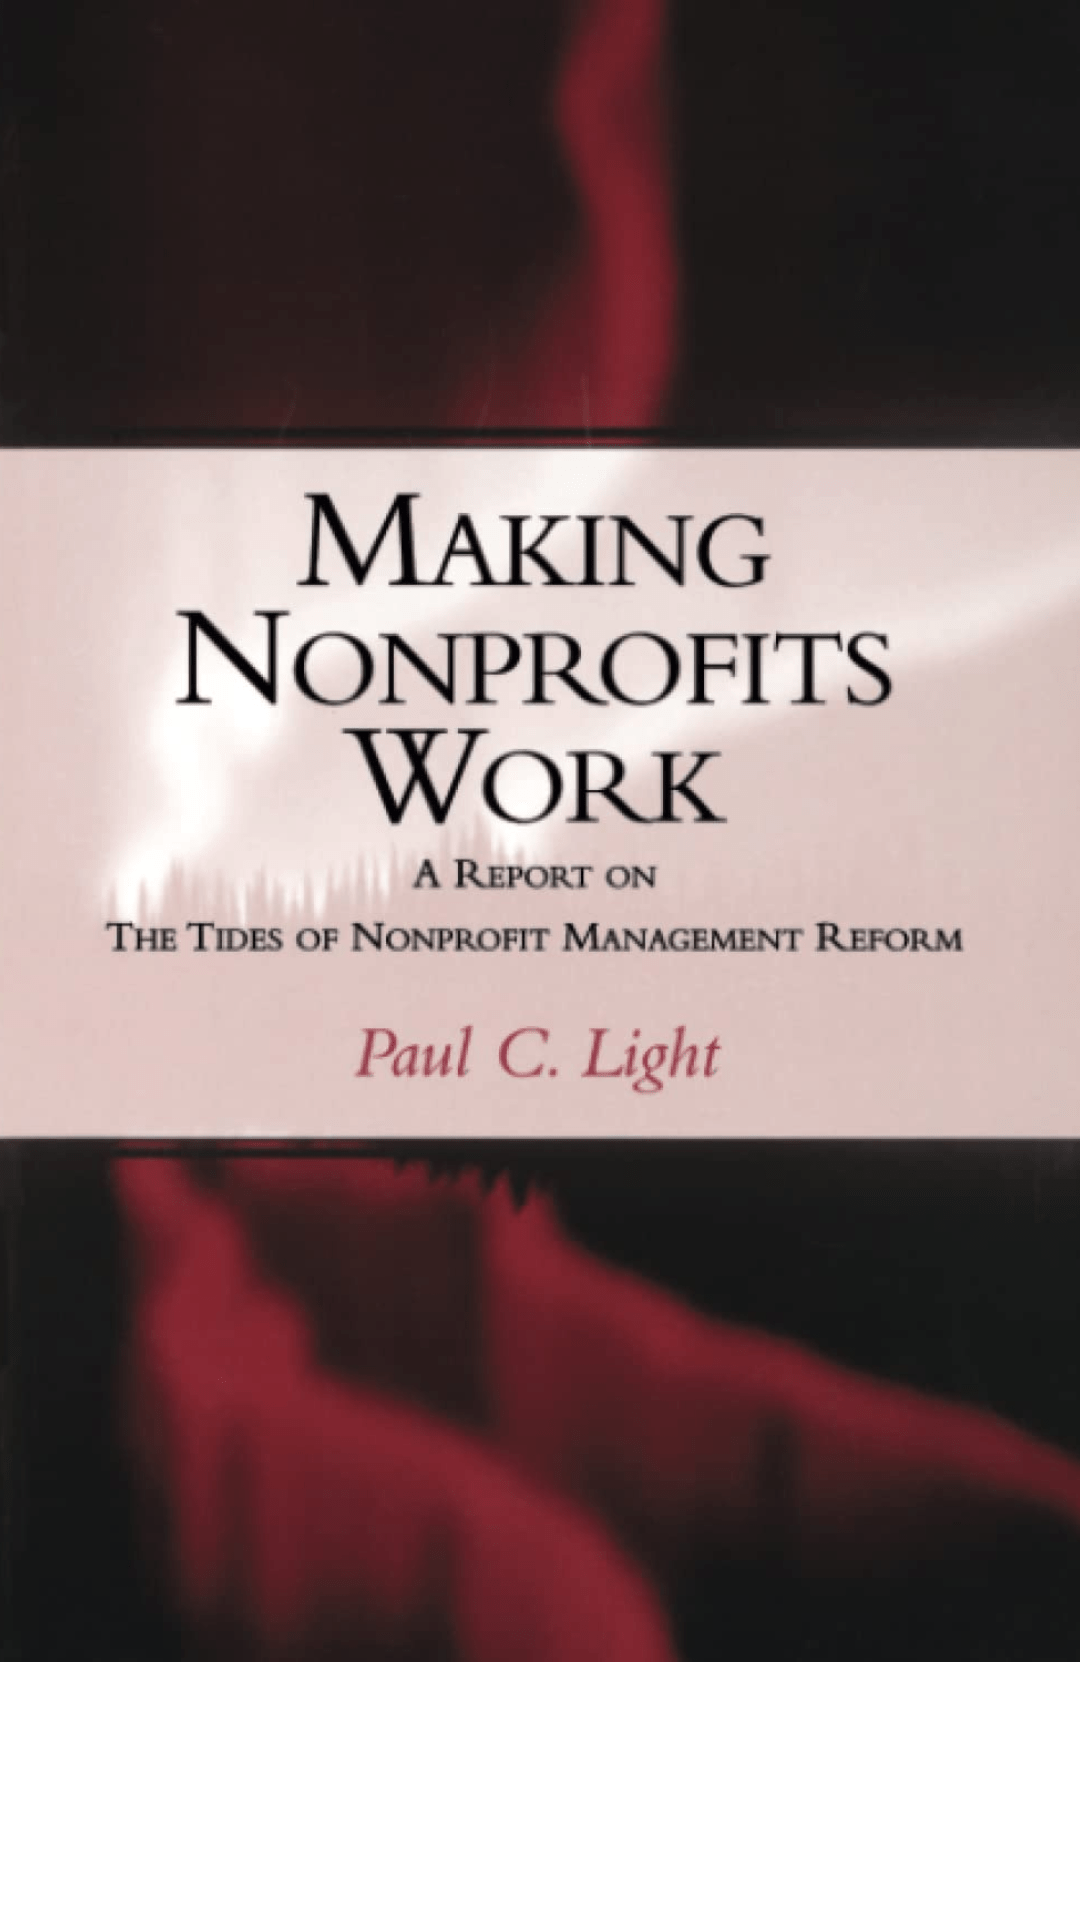 Making Nonprofits Work: A Report on the Tides of Nonprofit Management Reform